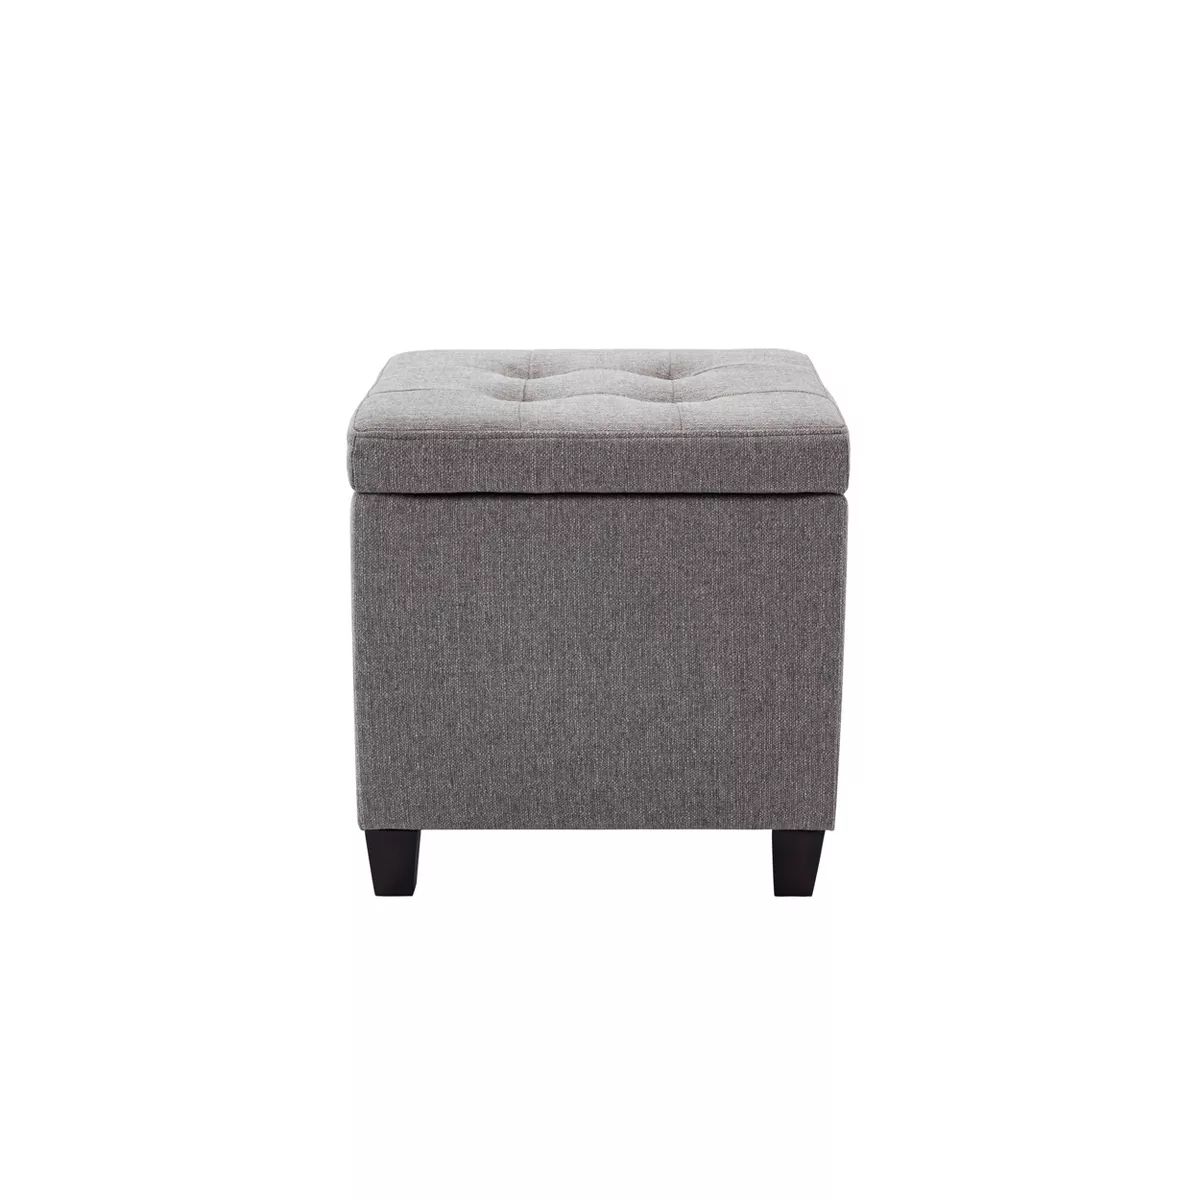 Square Button Tufted Storage Ottoman with Lift Off Lid Gray - WOVENBYRD | Target